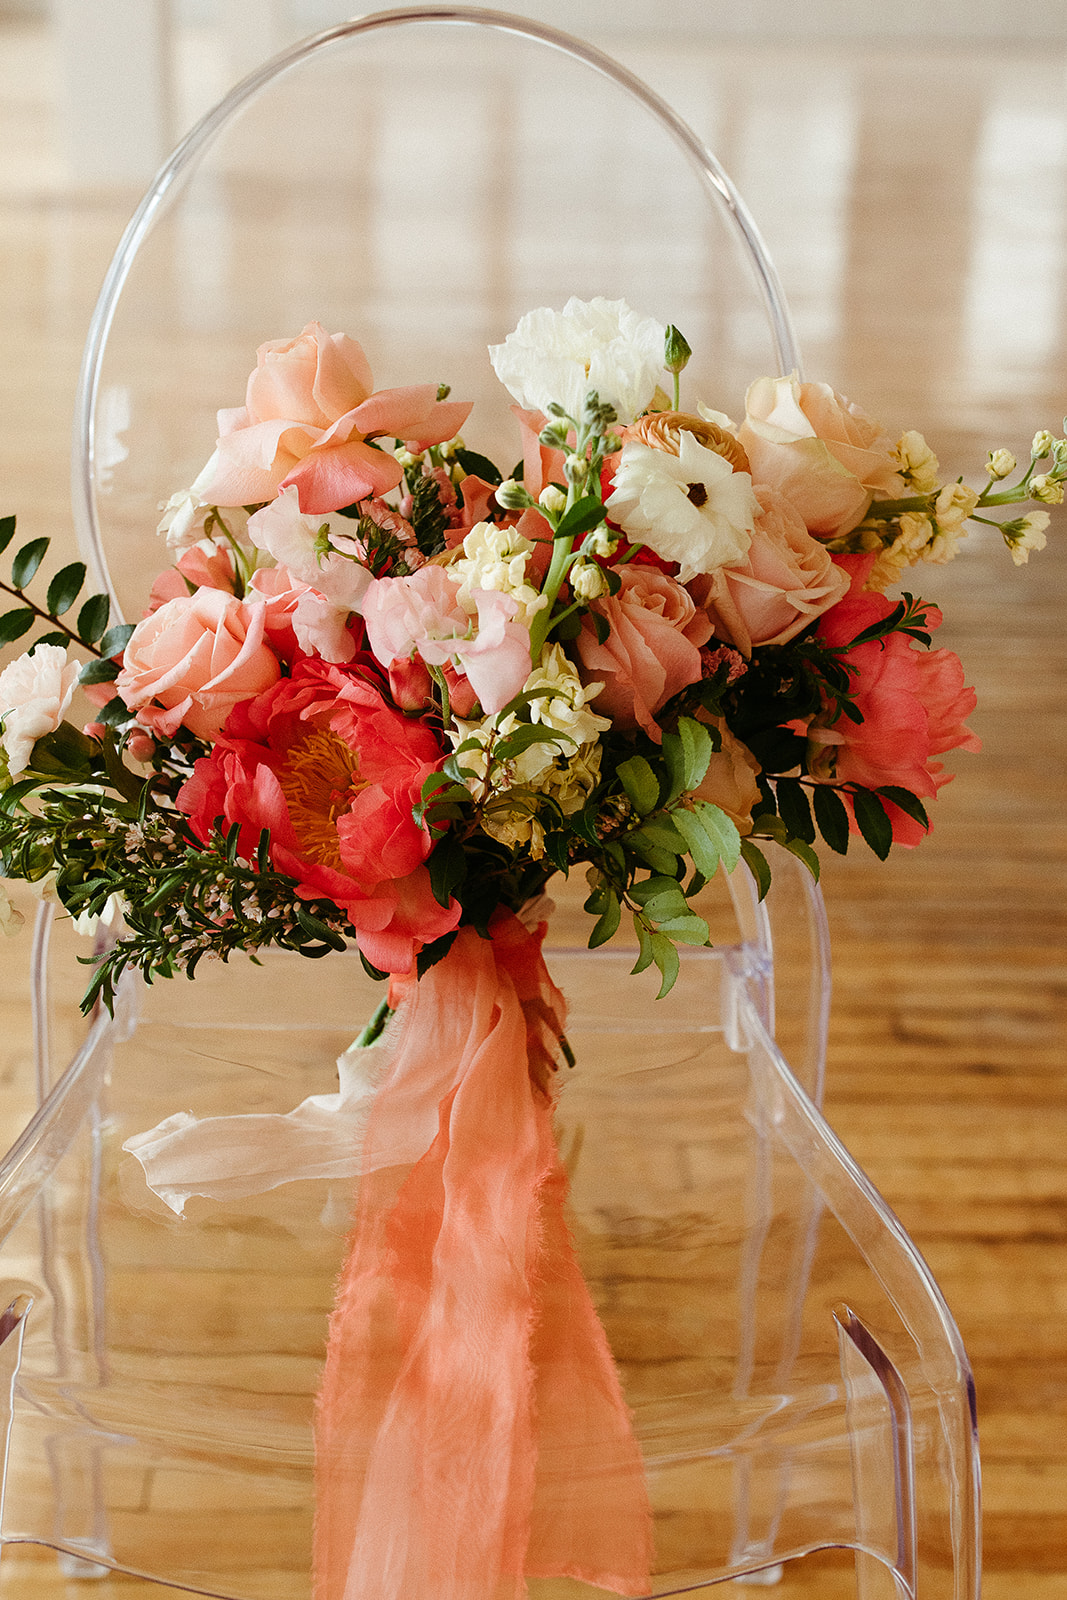 Floral design with a citrus inspired colour palette with dreamy peach, pink and grapefruit hues